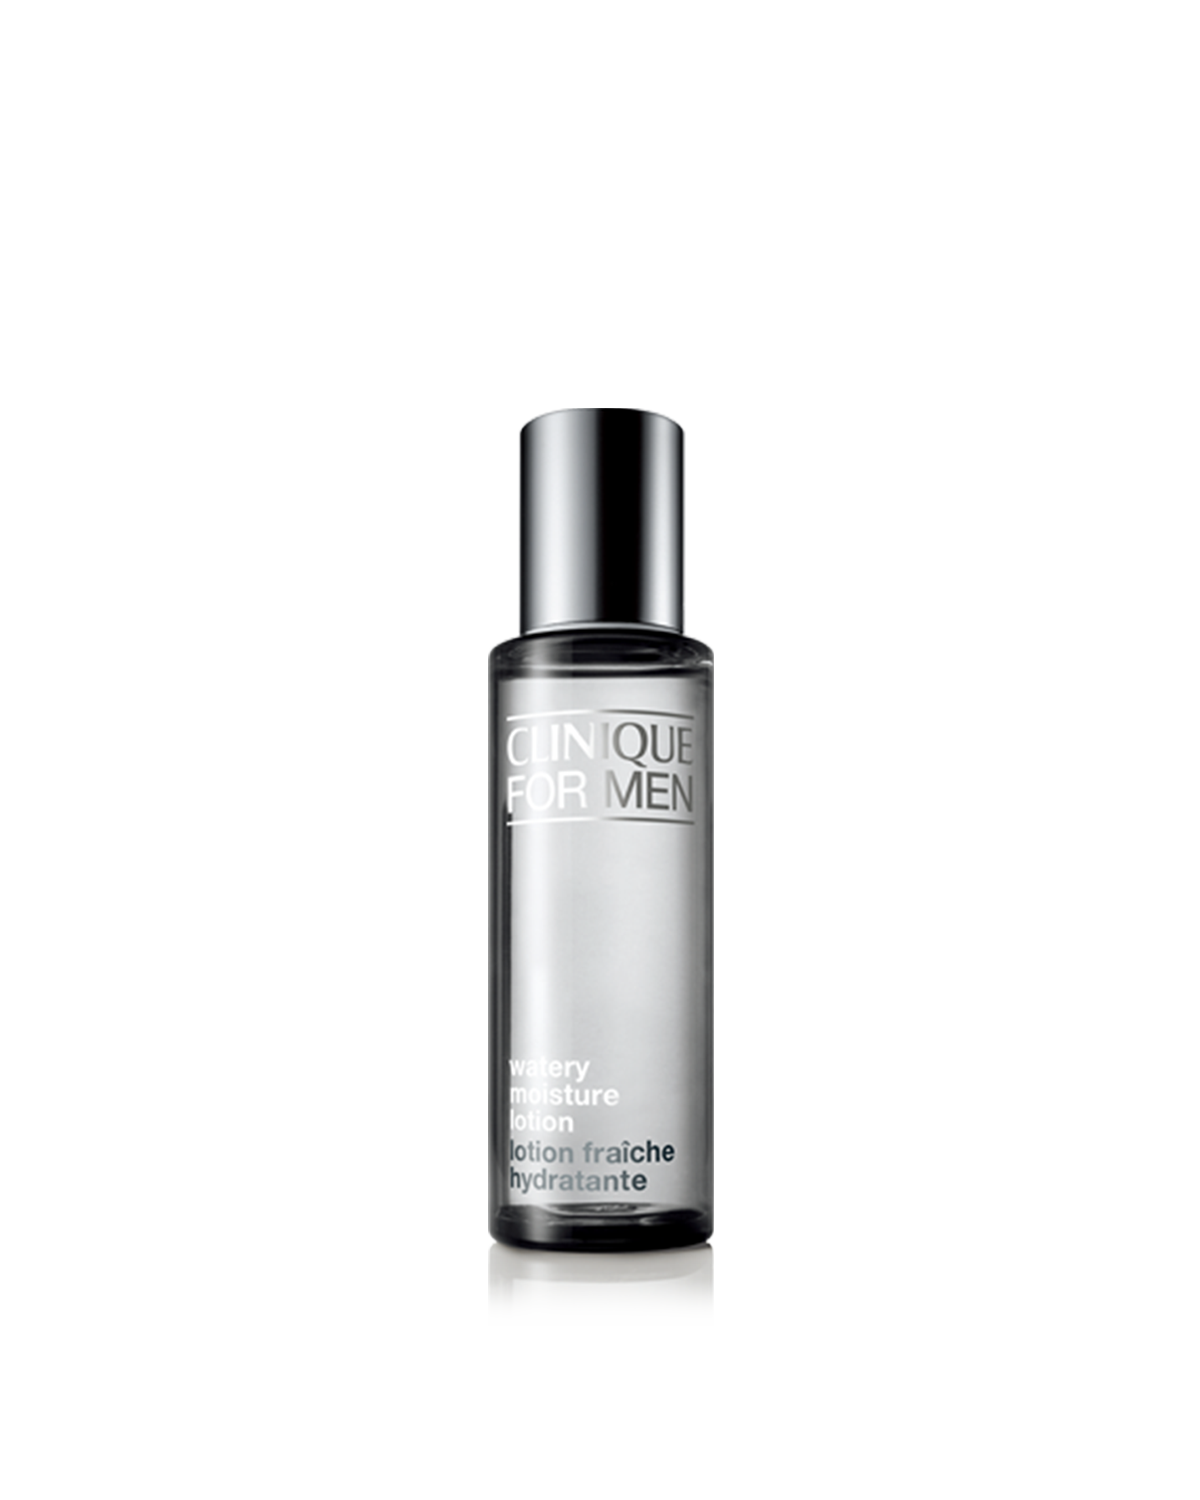 Clinique For Men™ Watery Moisture Lotion